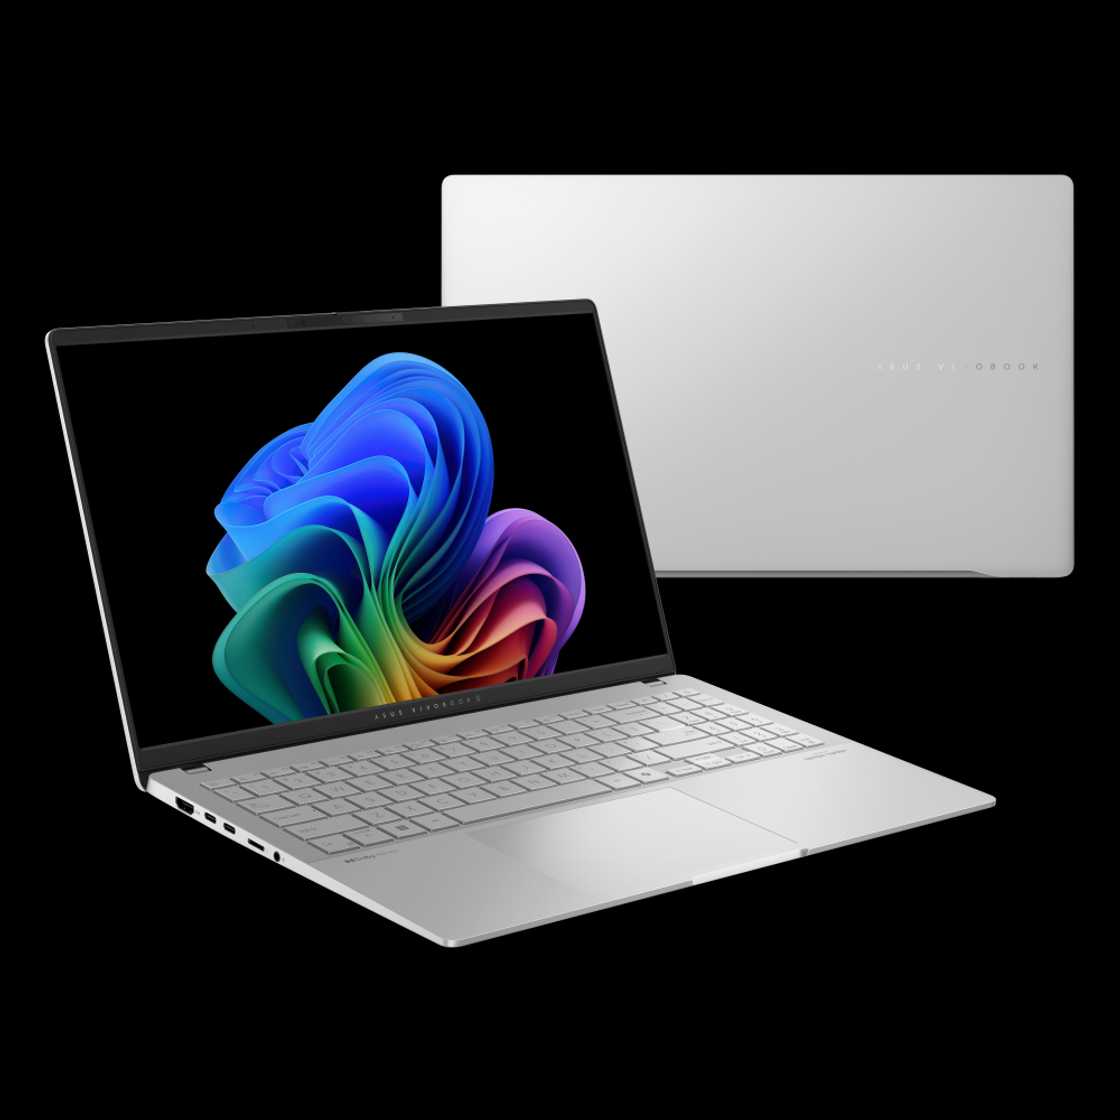 ASUS Debuts ASUS Vivobook S 15, its First Copilot+ PC Packed with Windows 11 AI Features